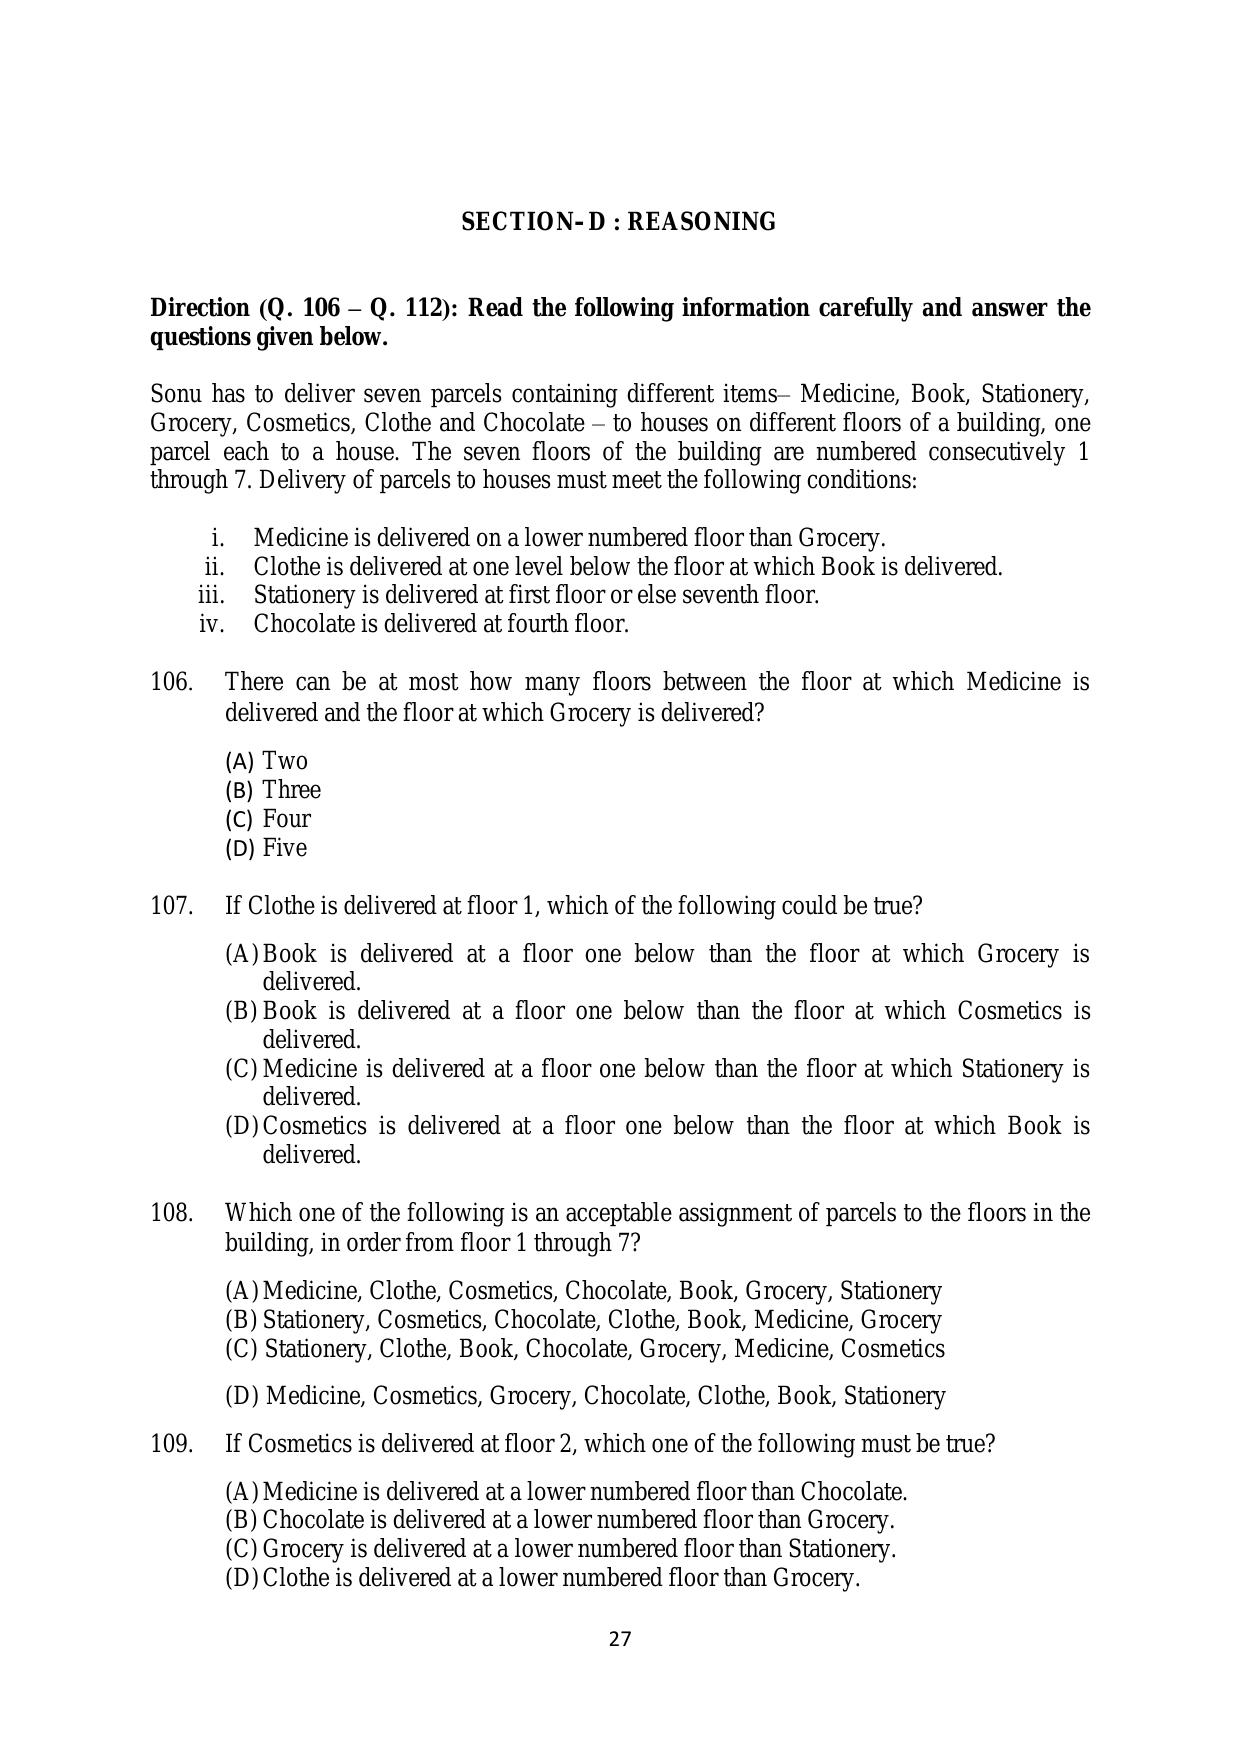 AILET 2020 Question Paper for BA LLB - Page 27